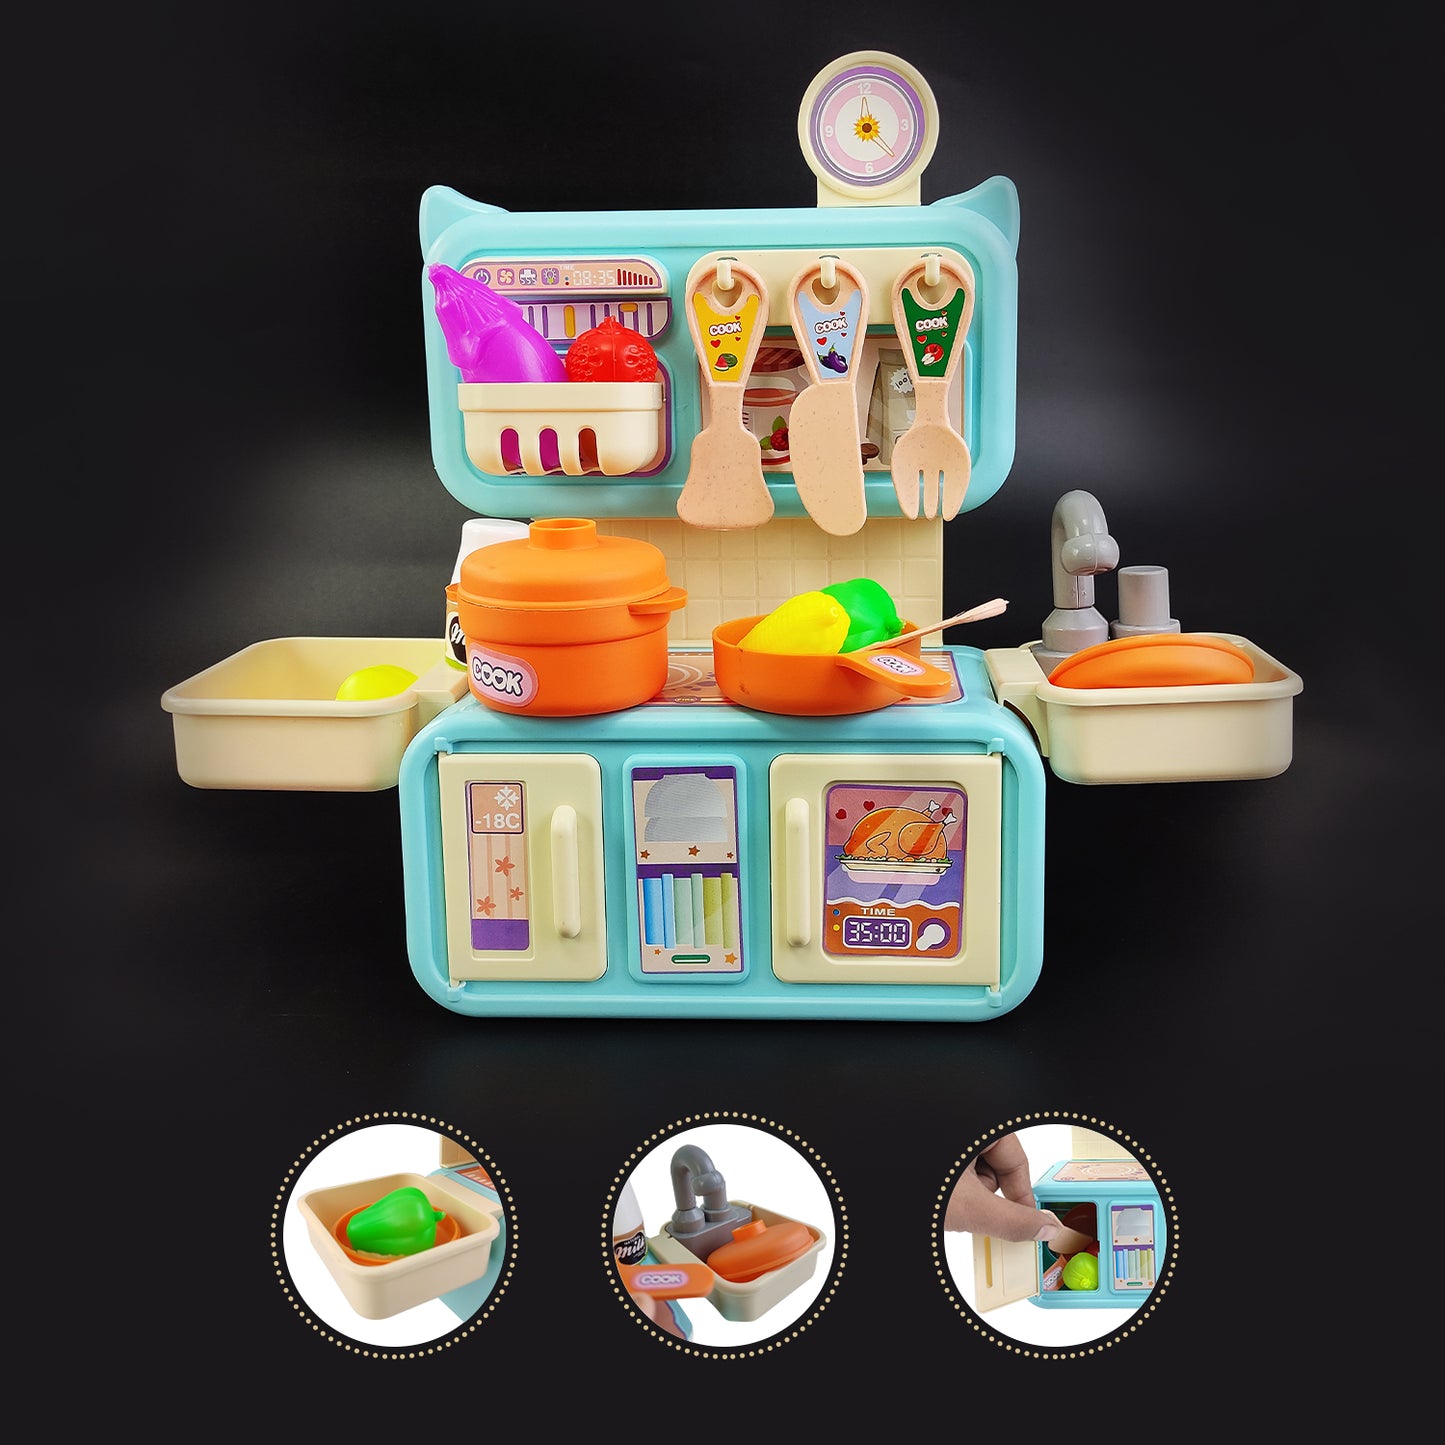 NHR Dream Kitchen Set: Interactive Playset, Product Accessories, Storage, Ages 3+